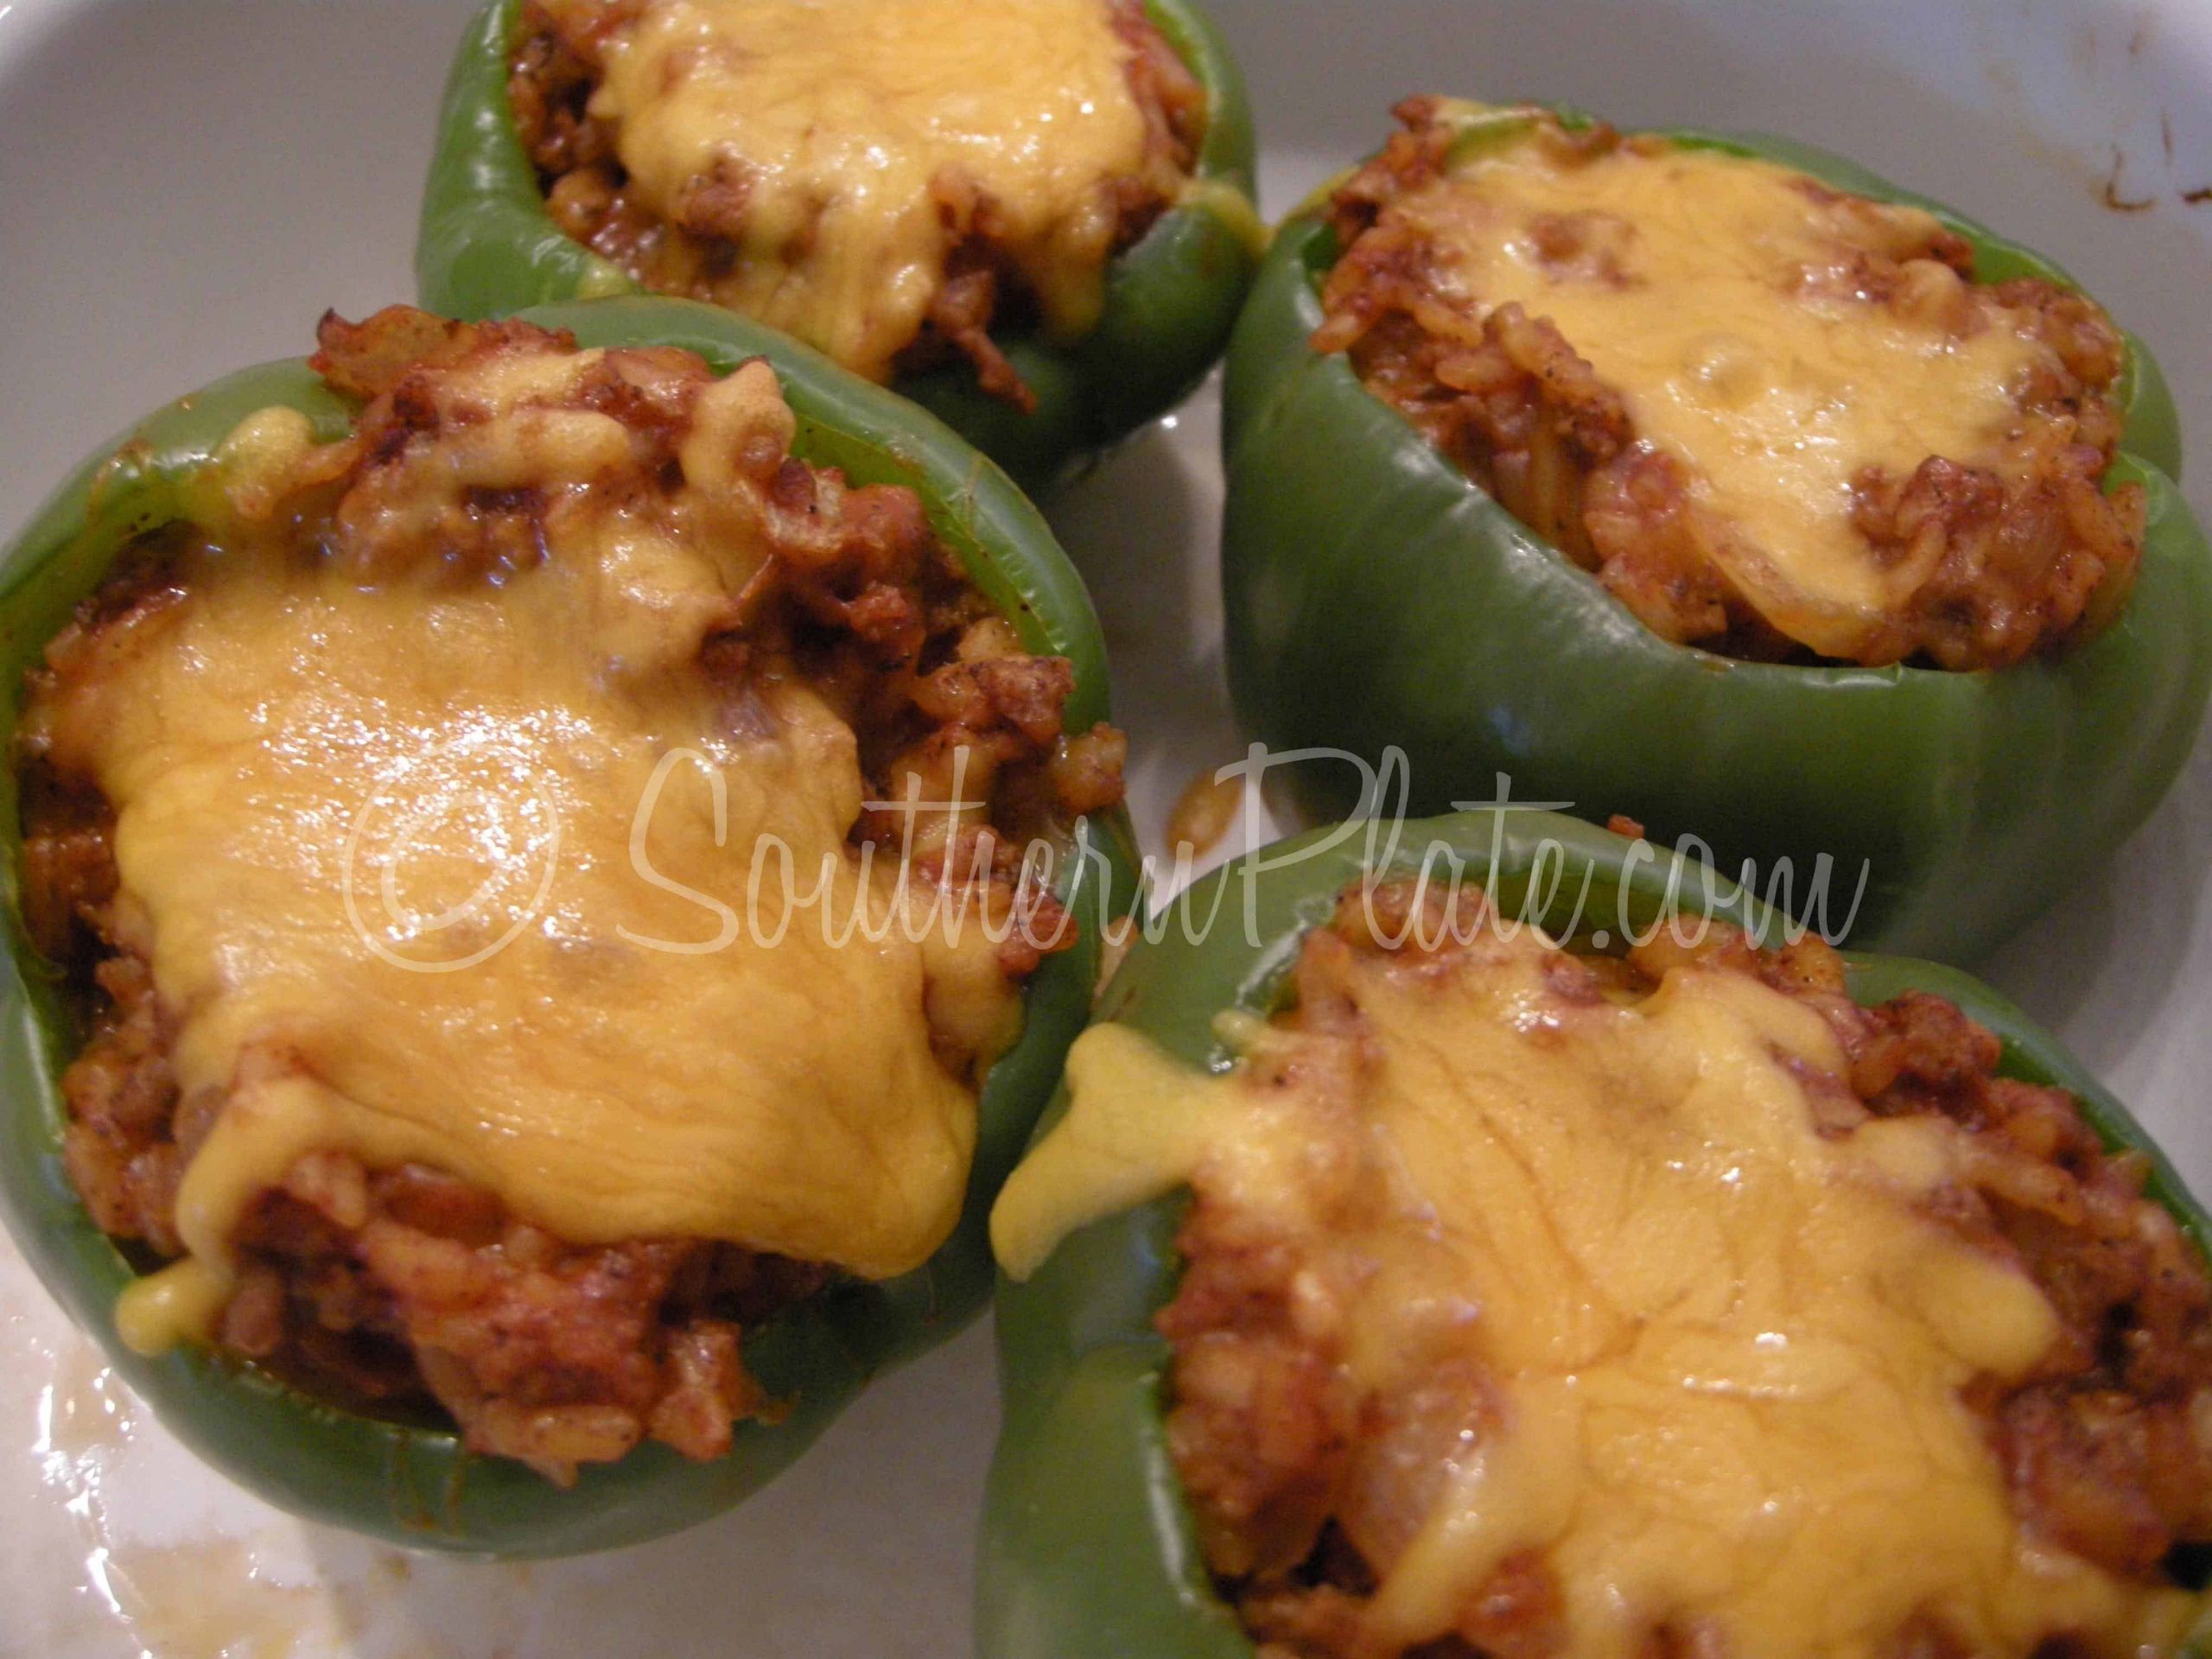 Southern Stuffed Bell Peppers
 Janice’s Stuffed Peppers